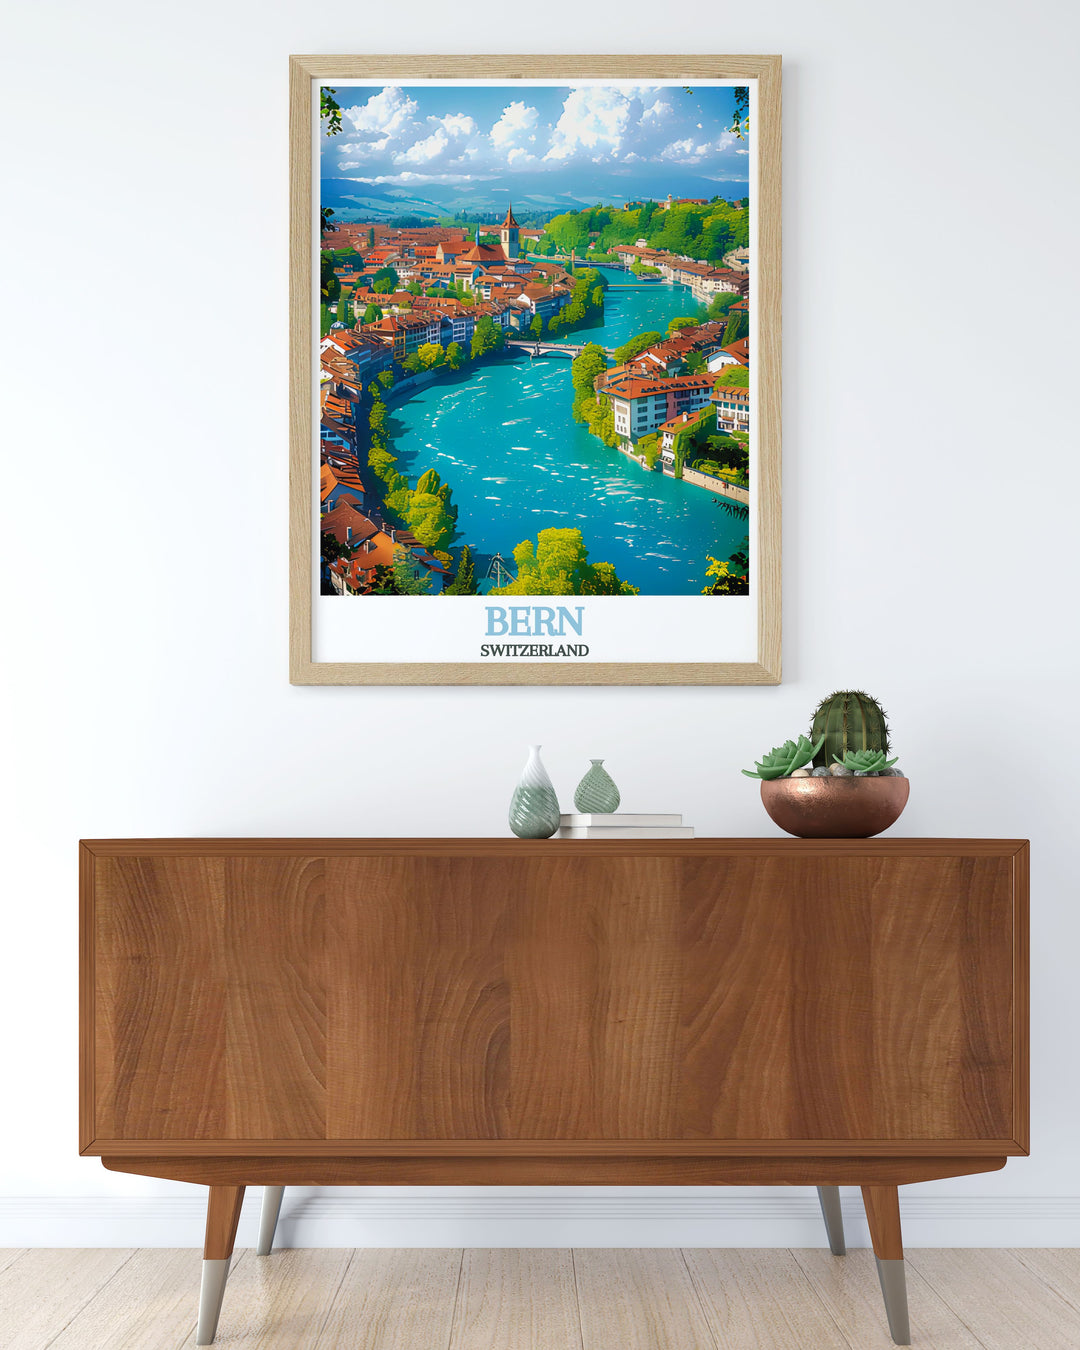 Showcasing the dramatic peaks of the Swiss Alps and the historic streets of Bern, this art print highlights one of Switzerlands most treasured cities, perfect for adventure seekers and history lovers.